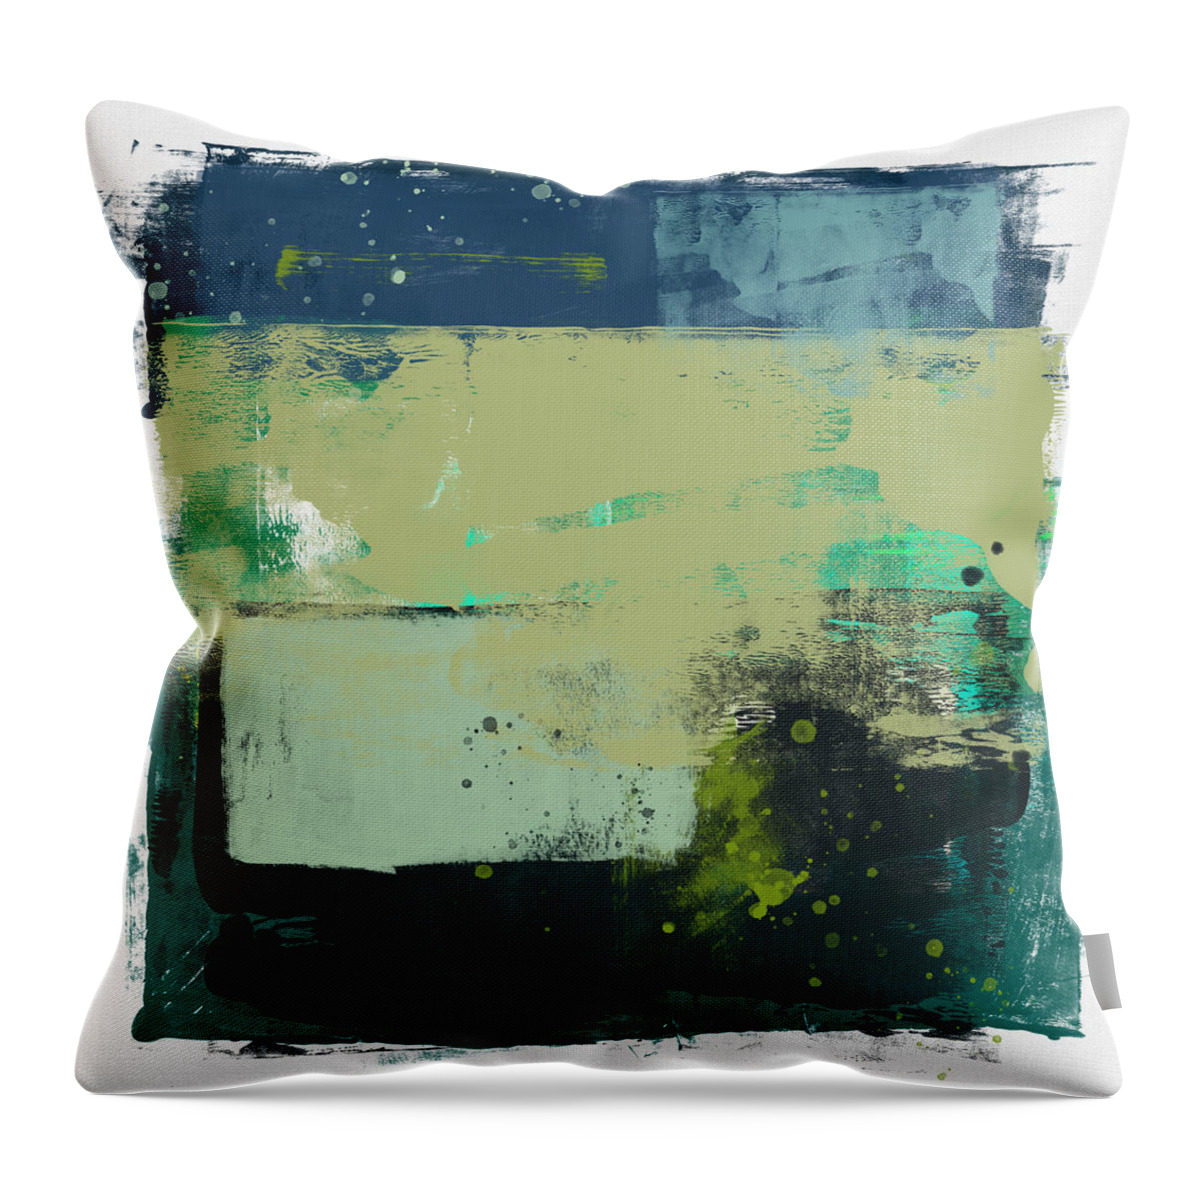 Abstract Throw Pillow featuring the painting Abstract Moss Green and Blue Study by Naxart Studio